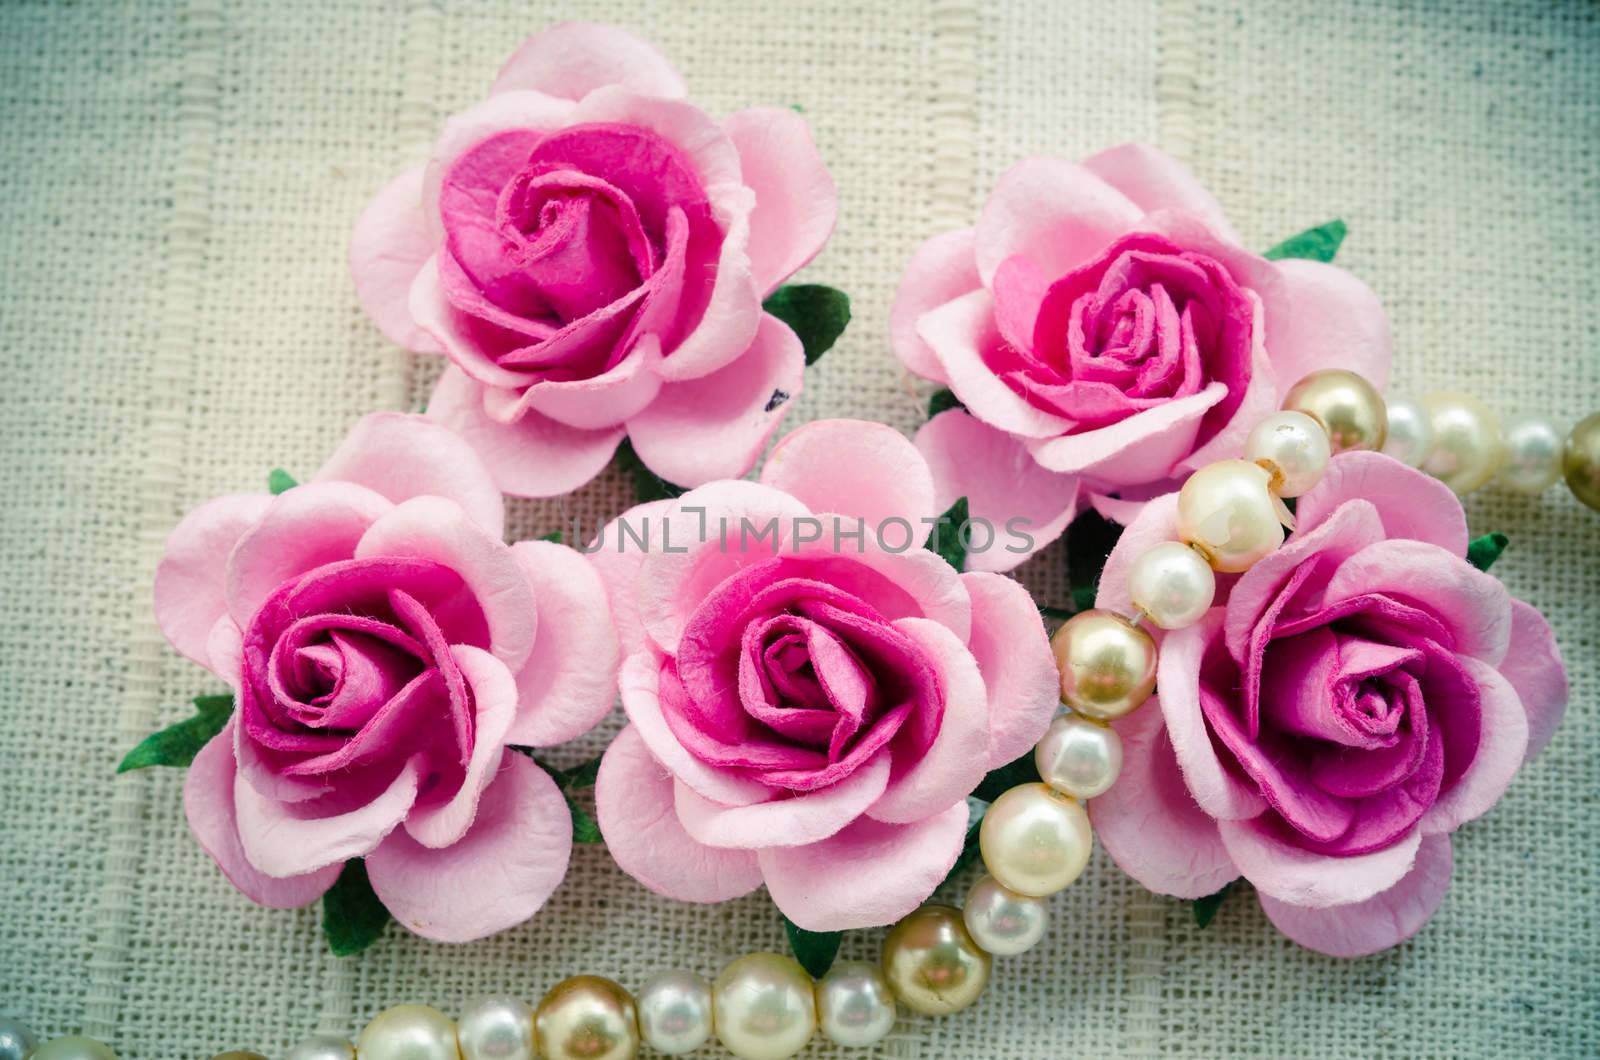 Vintage pink rose and pearl necklace. by Gamjai